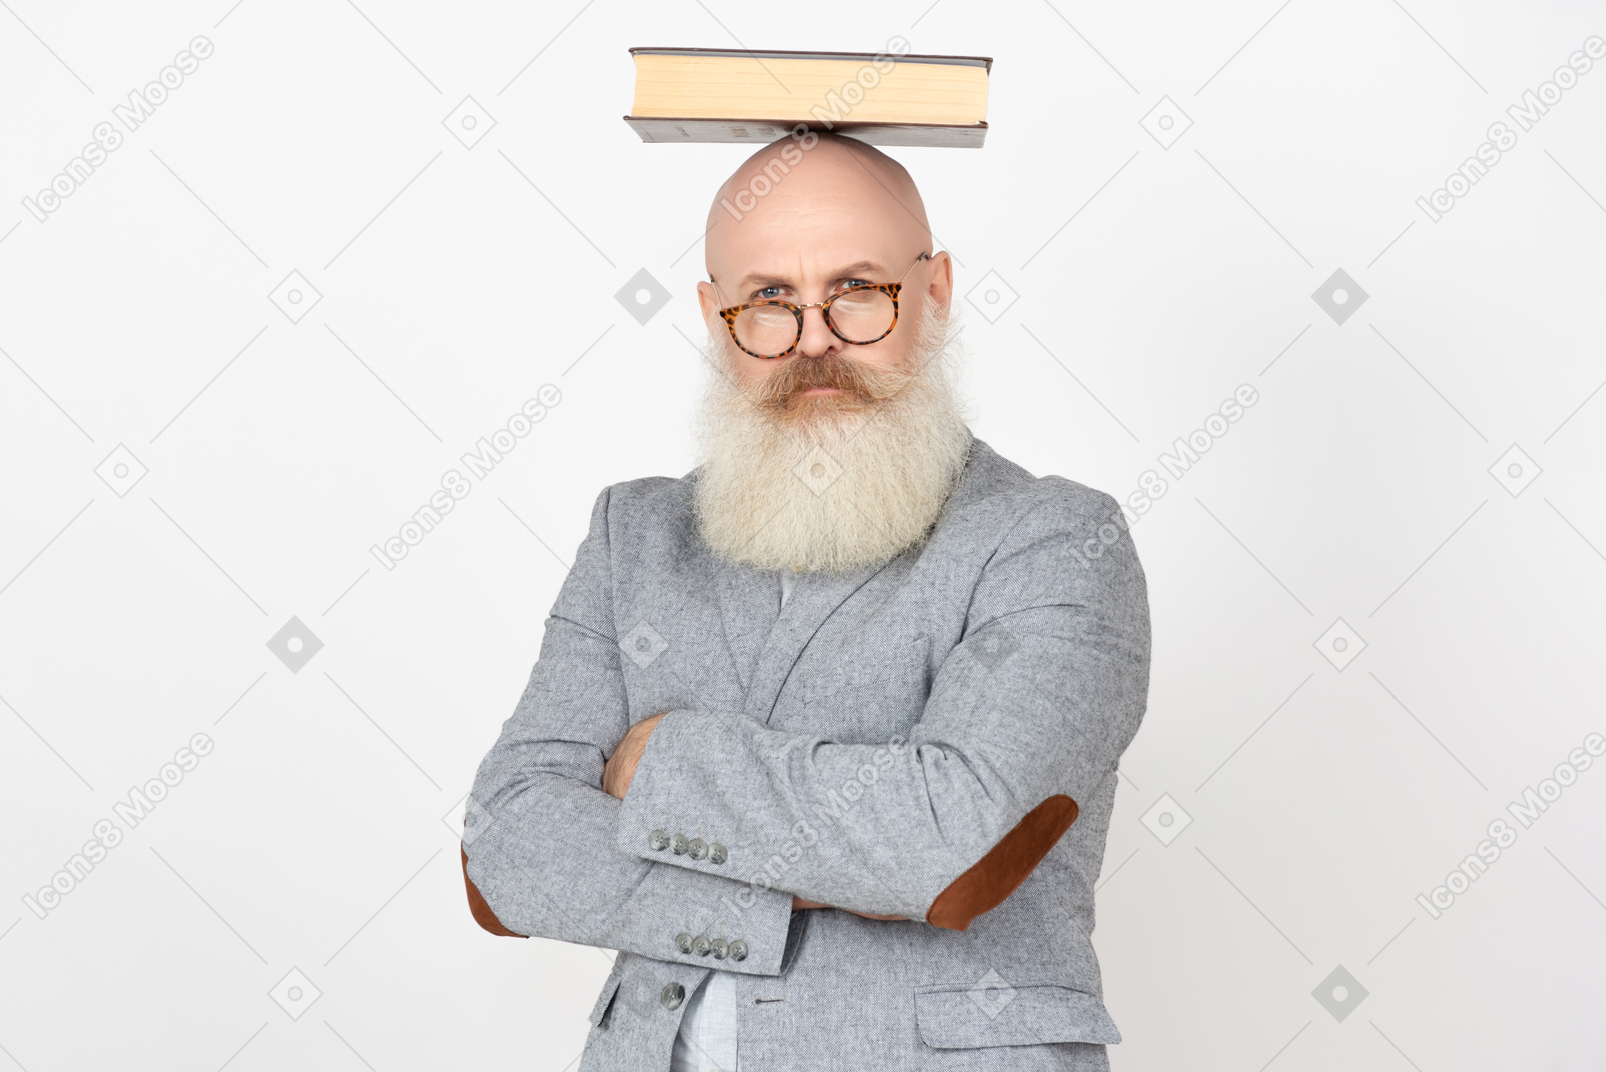 Serious looking mature professor holding book on his head